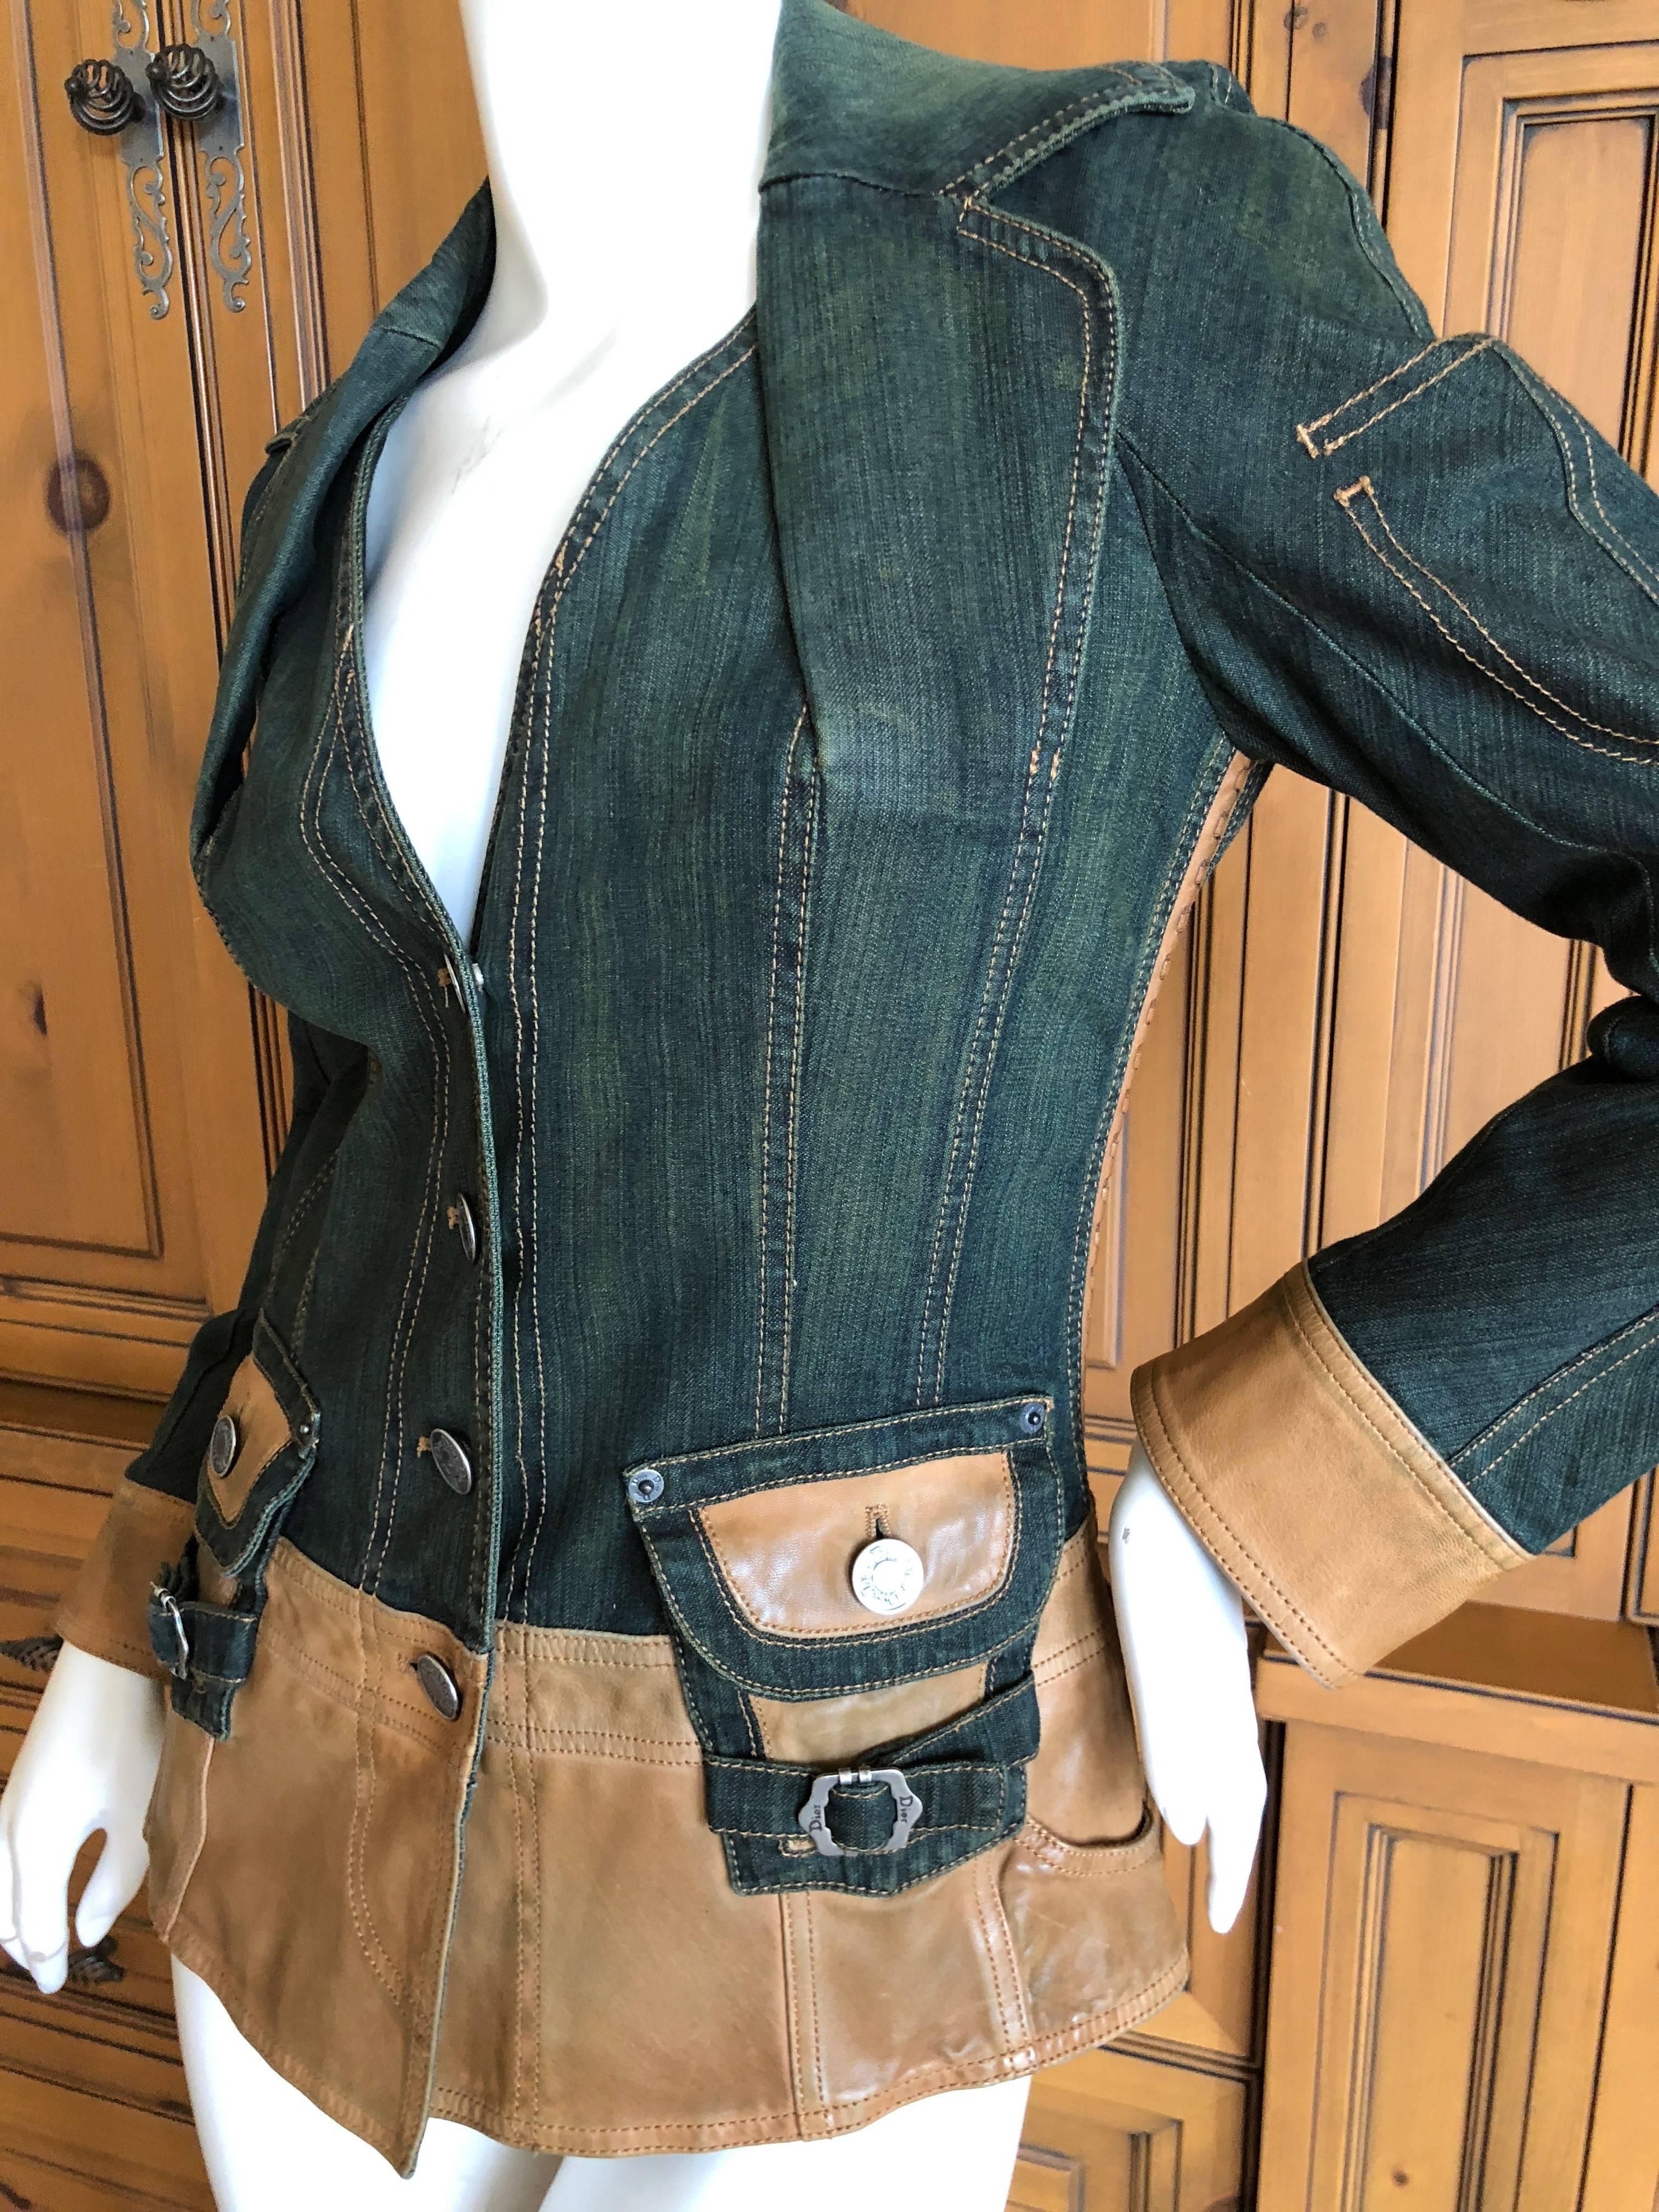 Christian Dior by John Galliano Vintage Leather Embellished Denim Bar Jacket In Excellent Condition For Sale In Cloverdale, CA